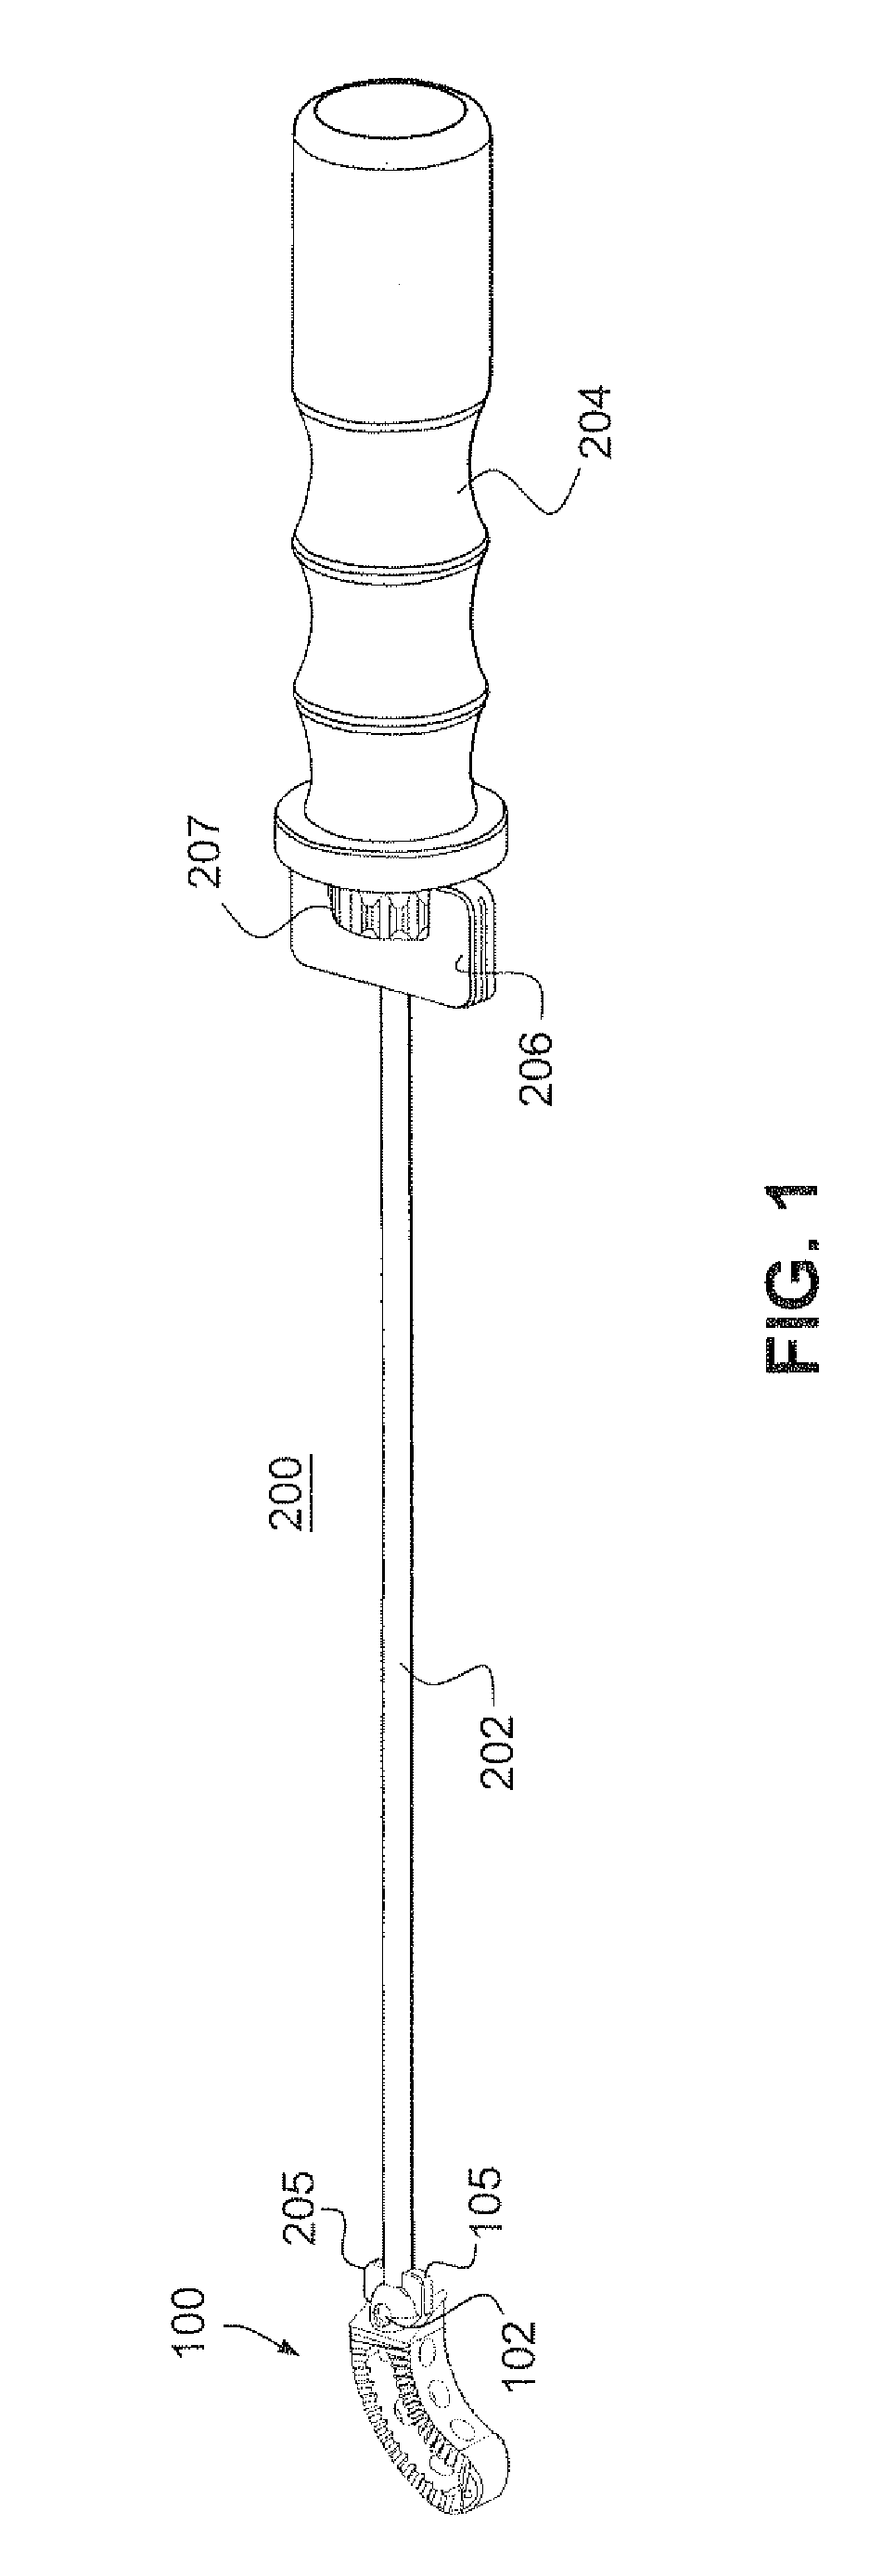 Spine implant insertion device and method